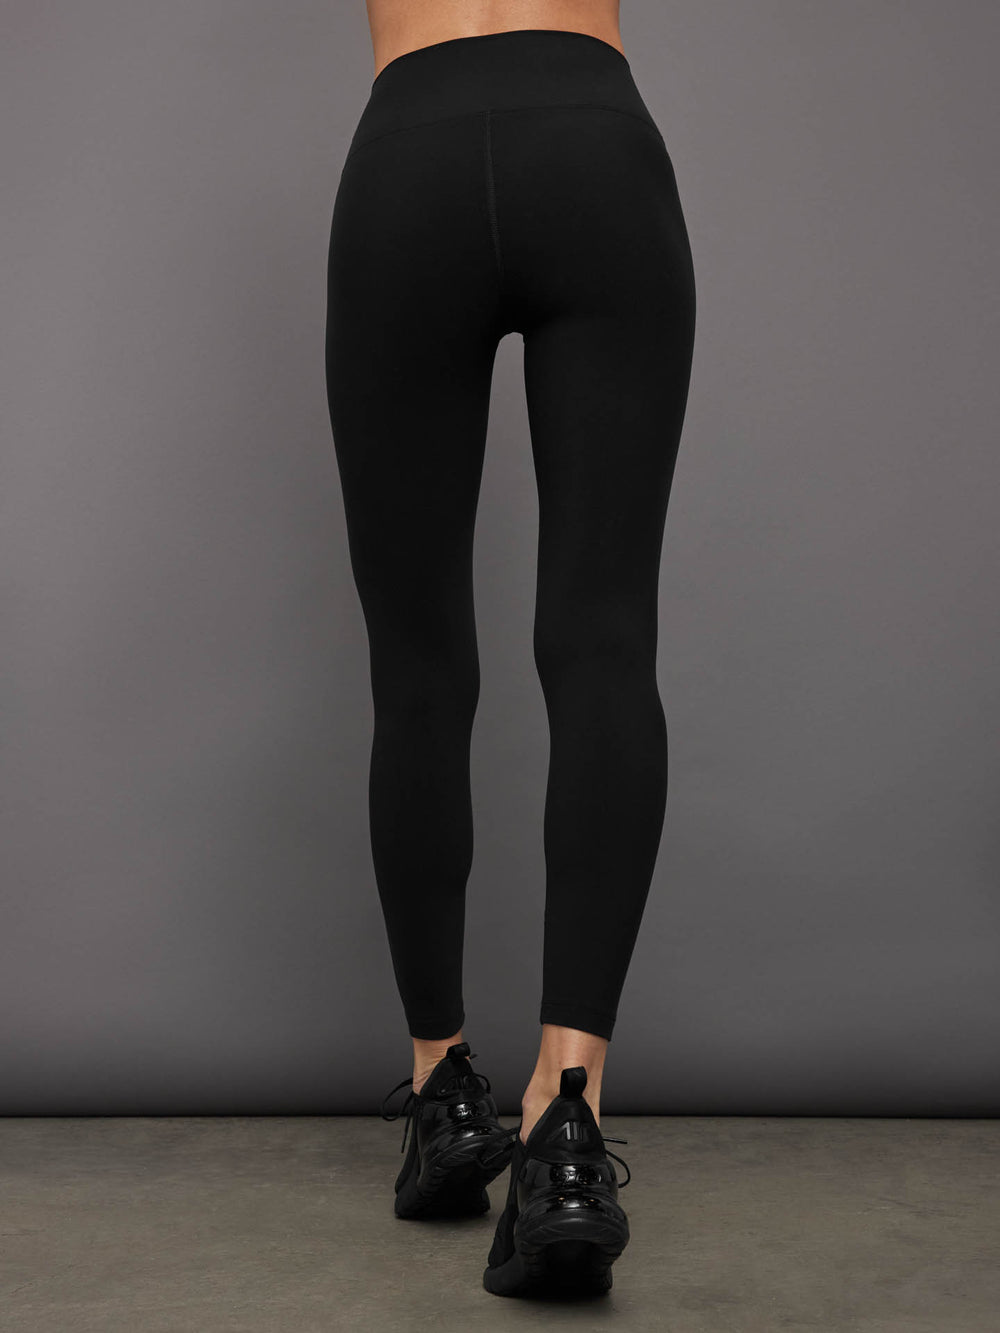 CARBON 38 WORTH THE HYPE? HIGH RISE LEGGINGS IN MELT TRY ON REVIEW